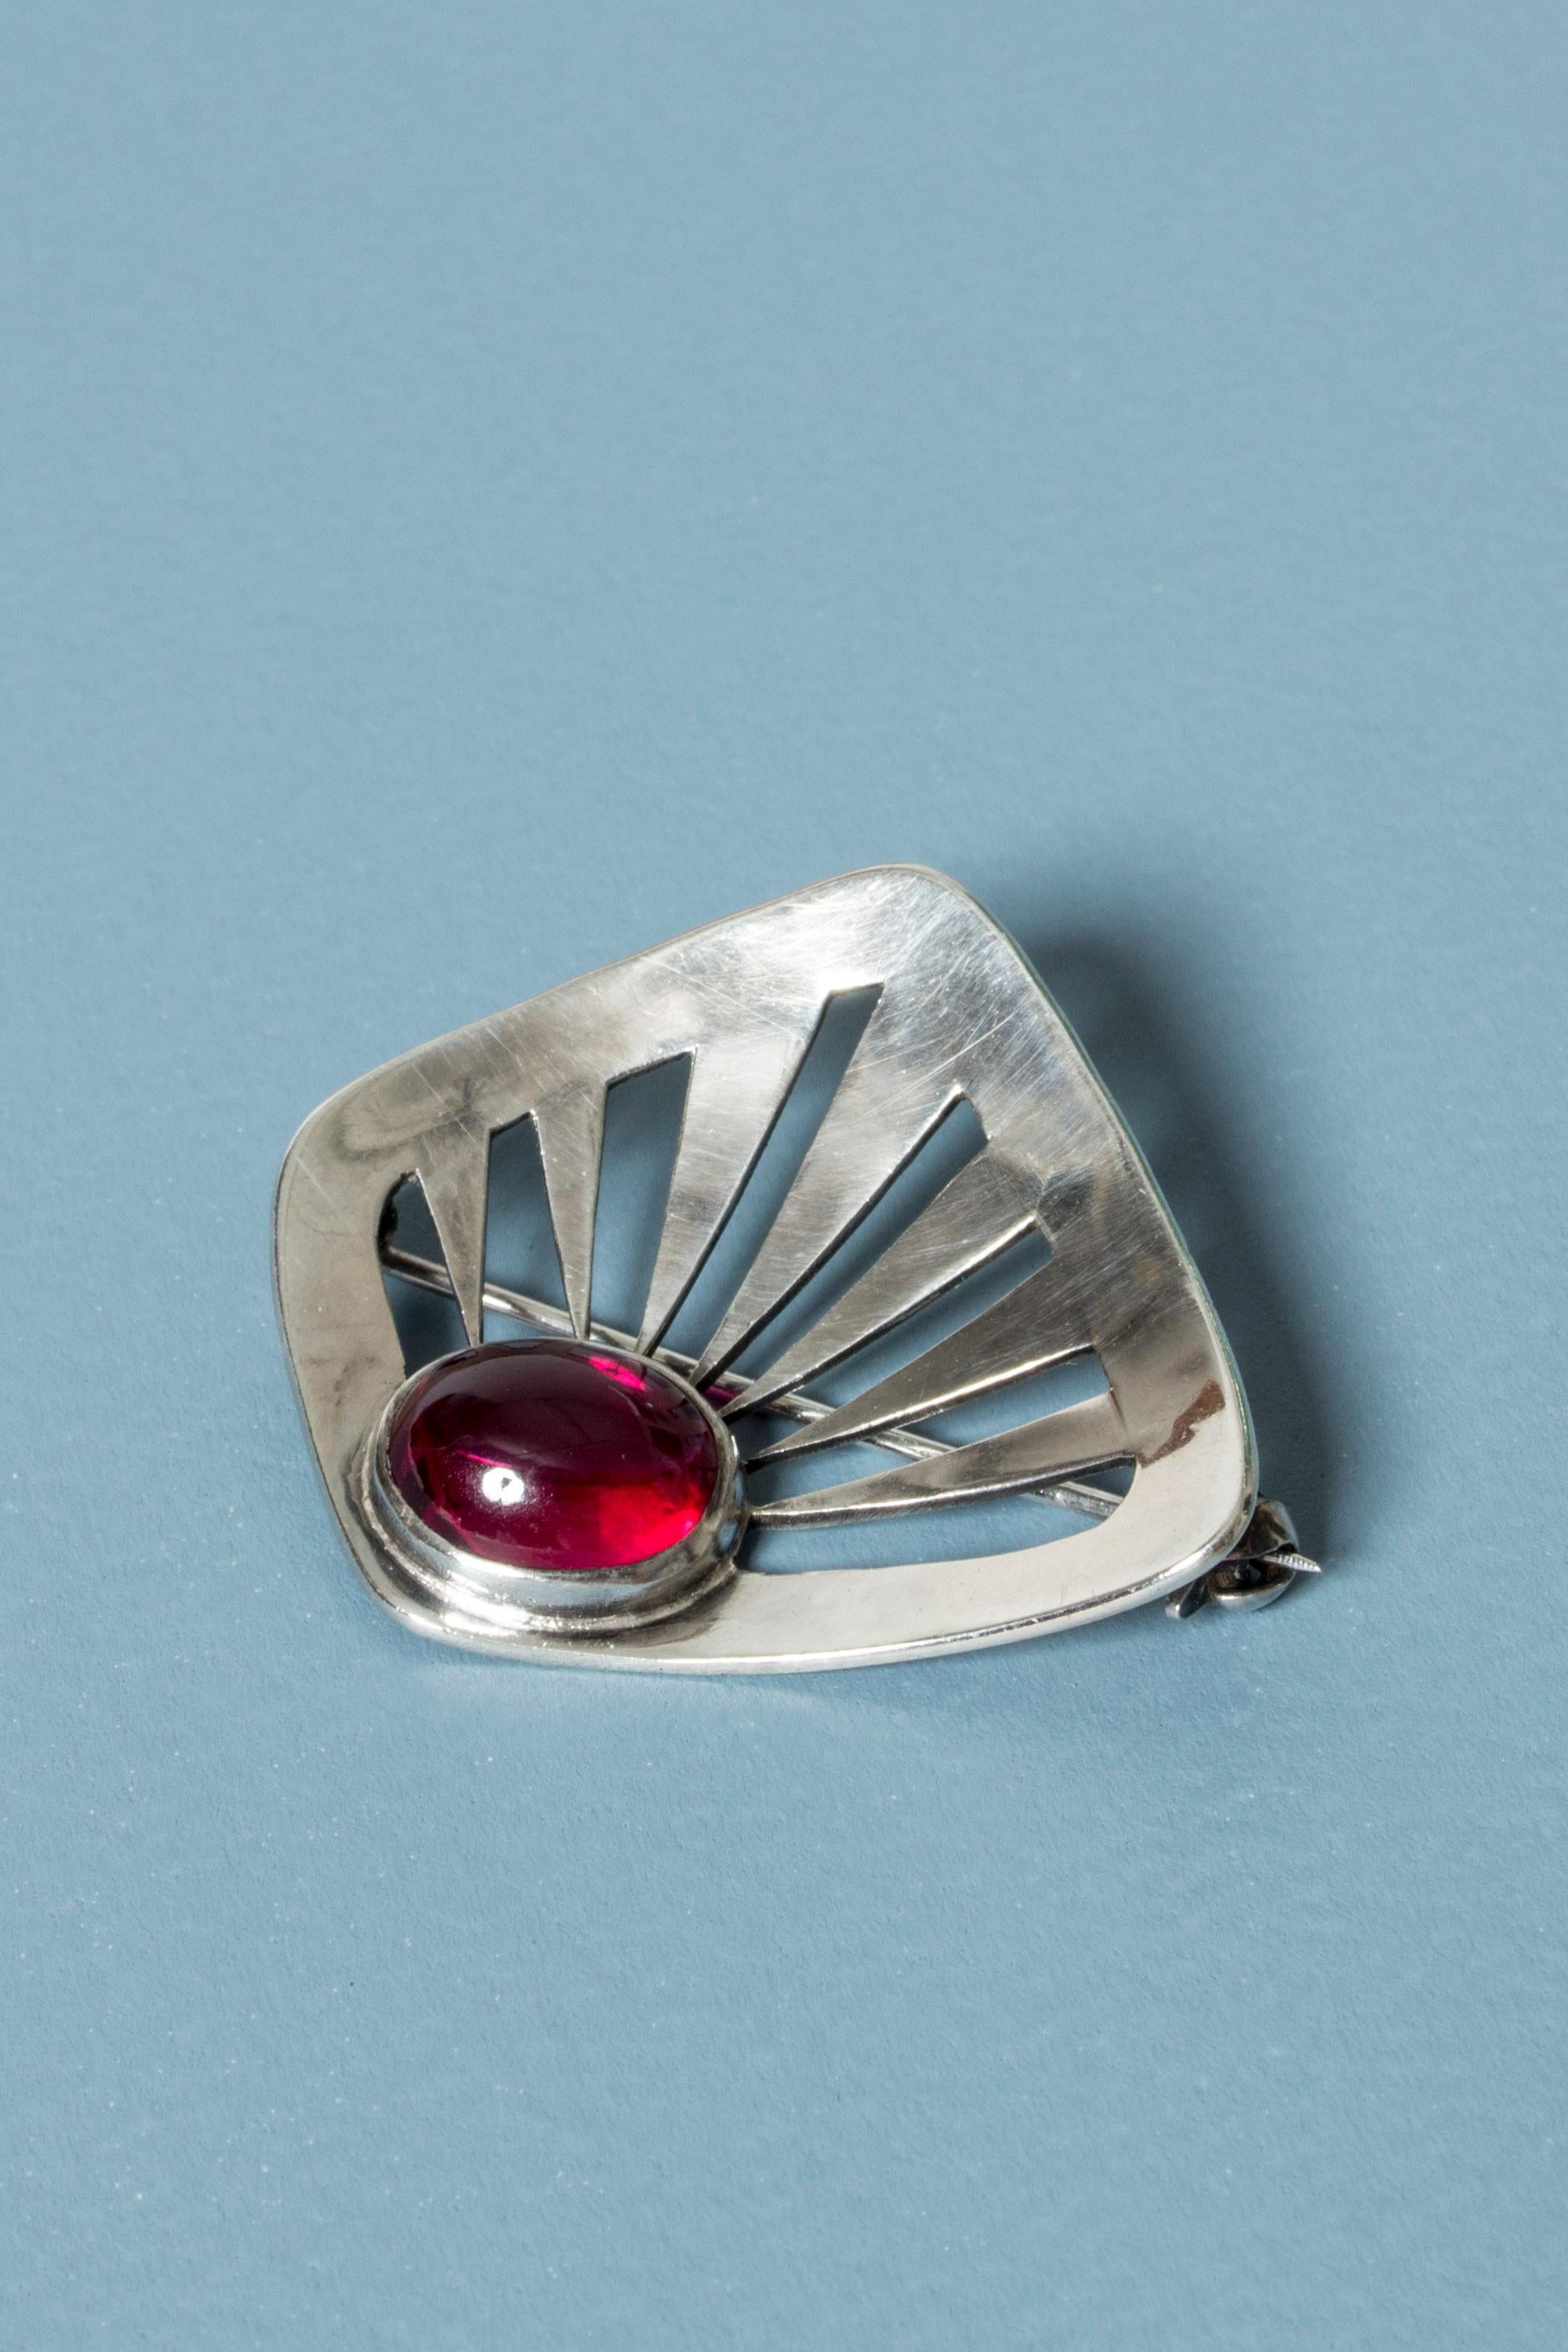 Lovely silver brooch by Rey Urban, with a striking garnet stone. Graphic cut out design of rays coming out from the stone.